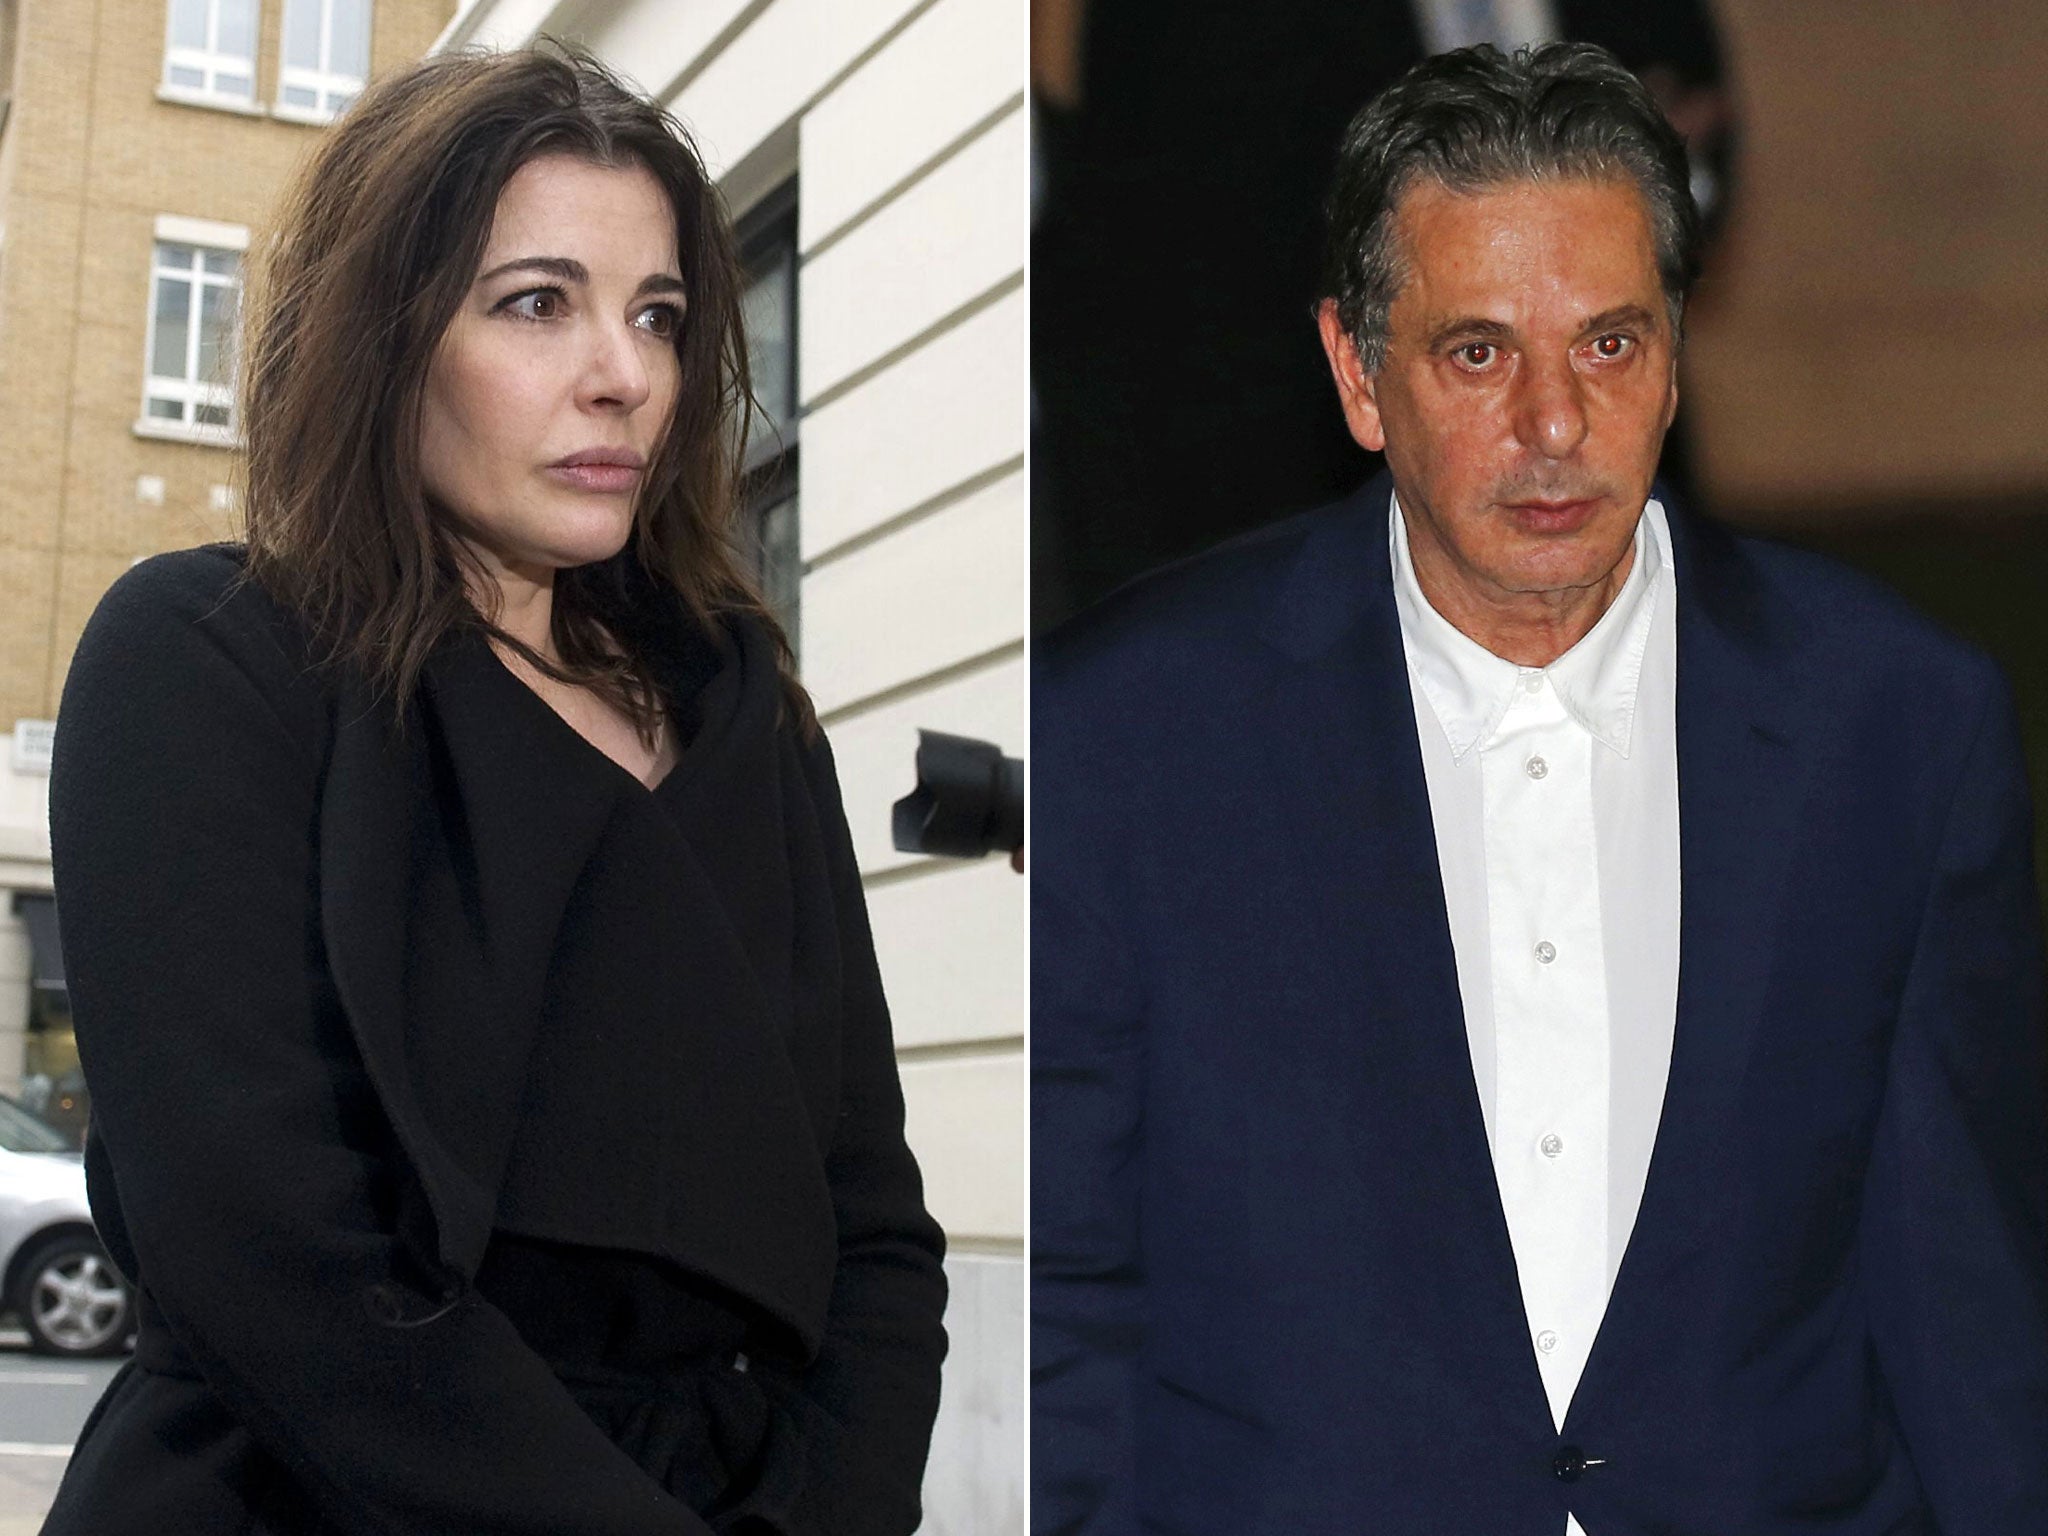 Charles Saatchi admitted he has 'no proof' whether his ex-wife Nigella Lawson has ever taken drugs